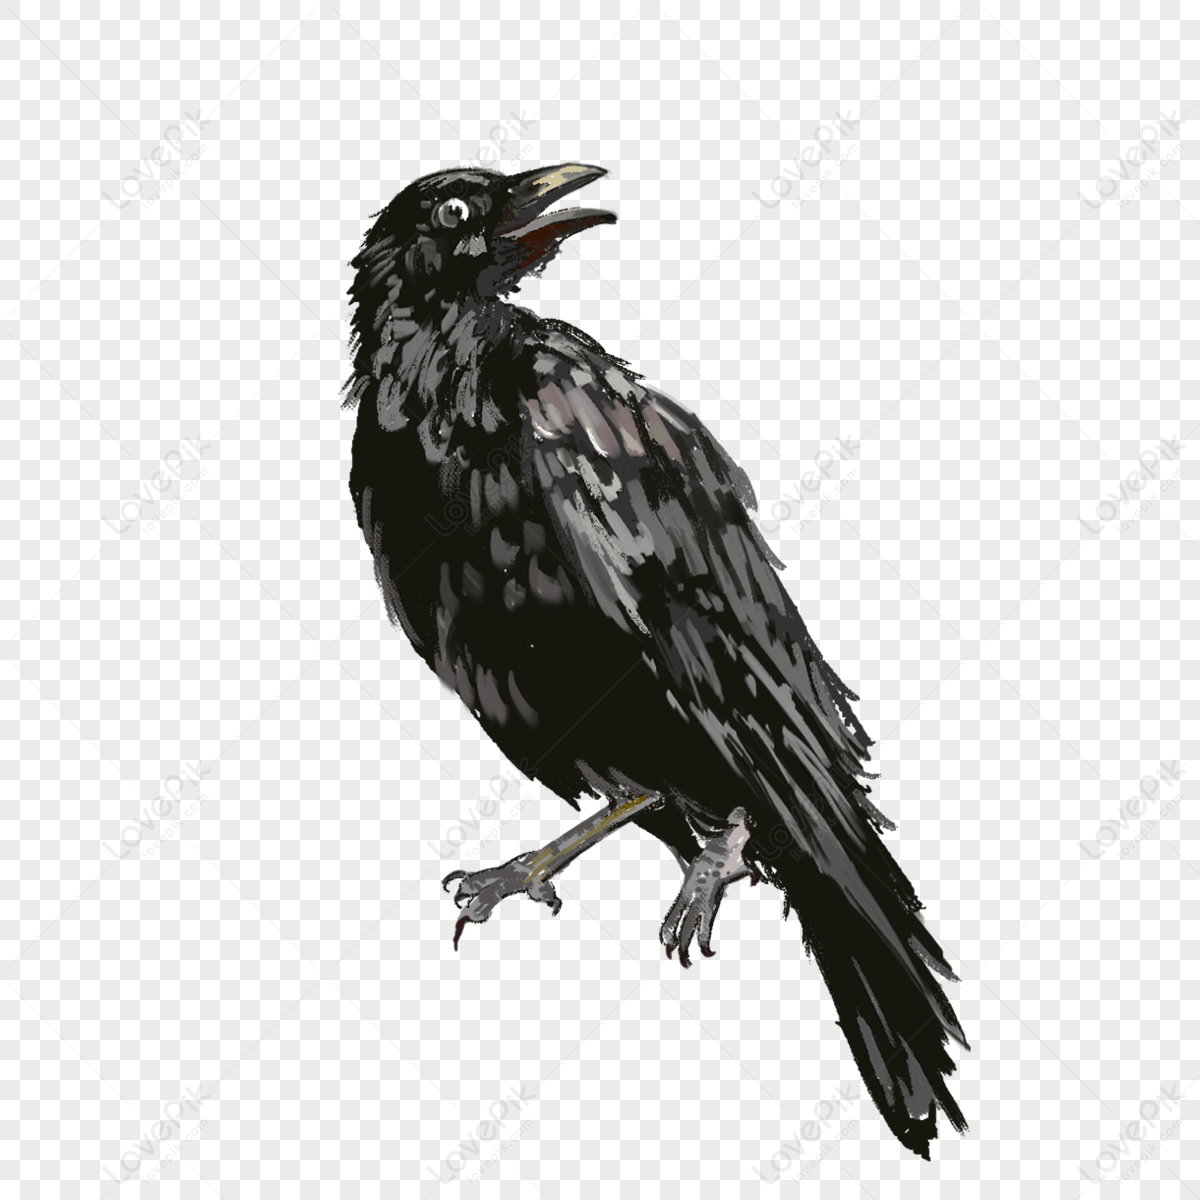 Download premium png of Png black feather design element by Busbus about  crow, black feather, raven, crow feather, and plum…